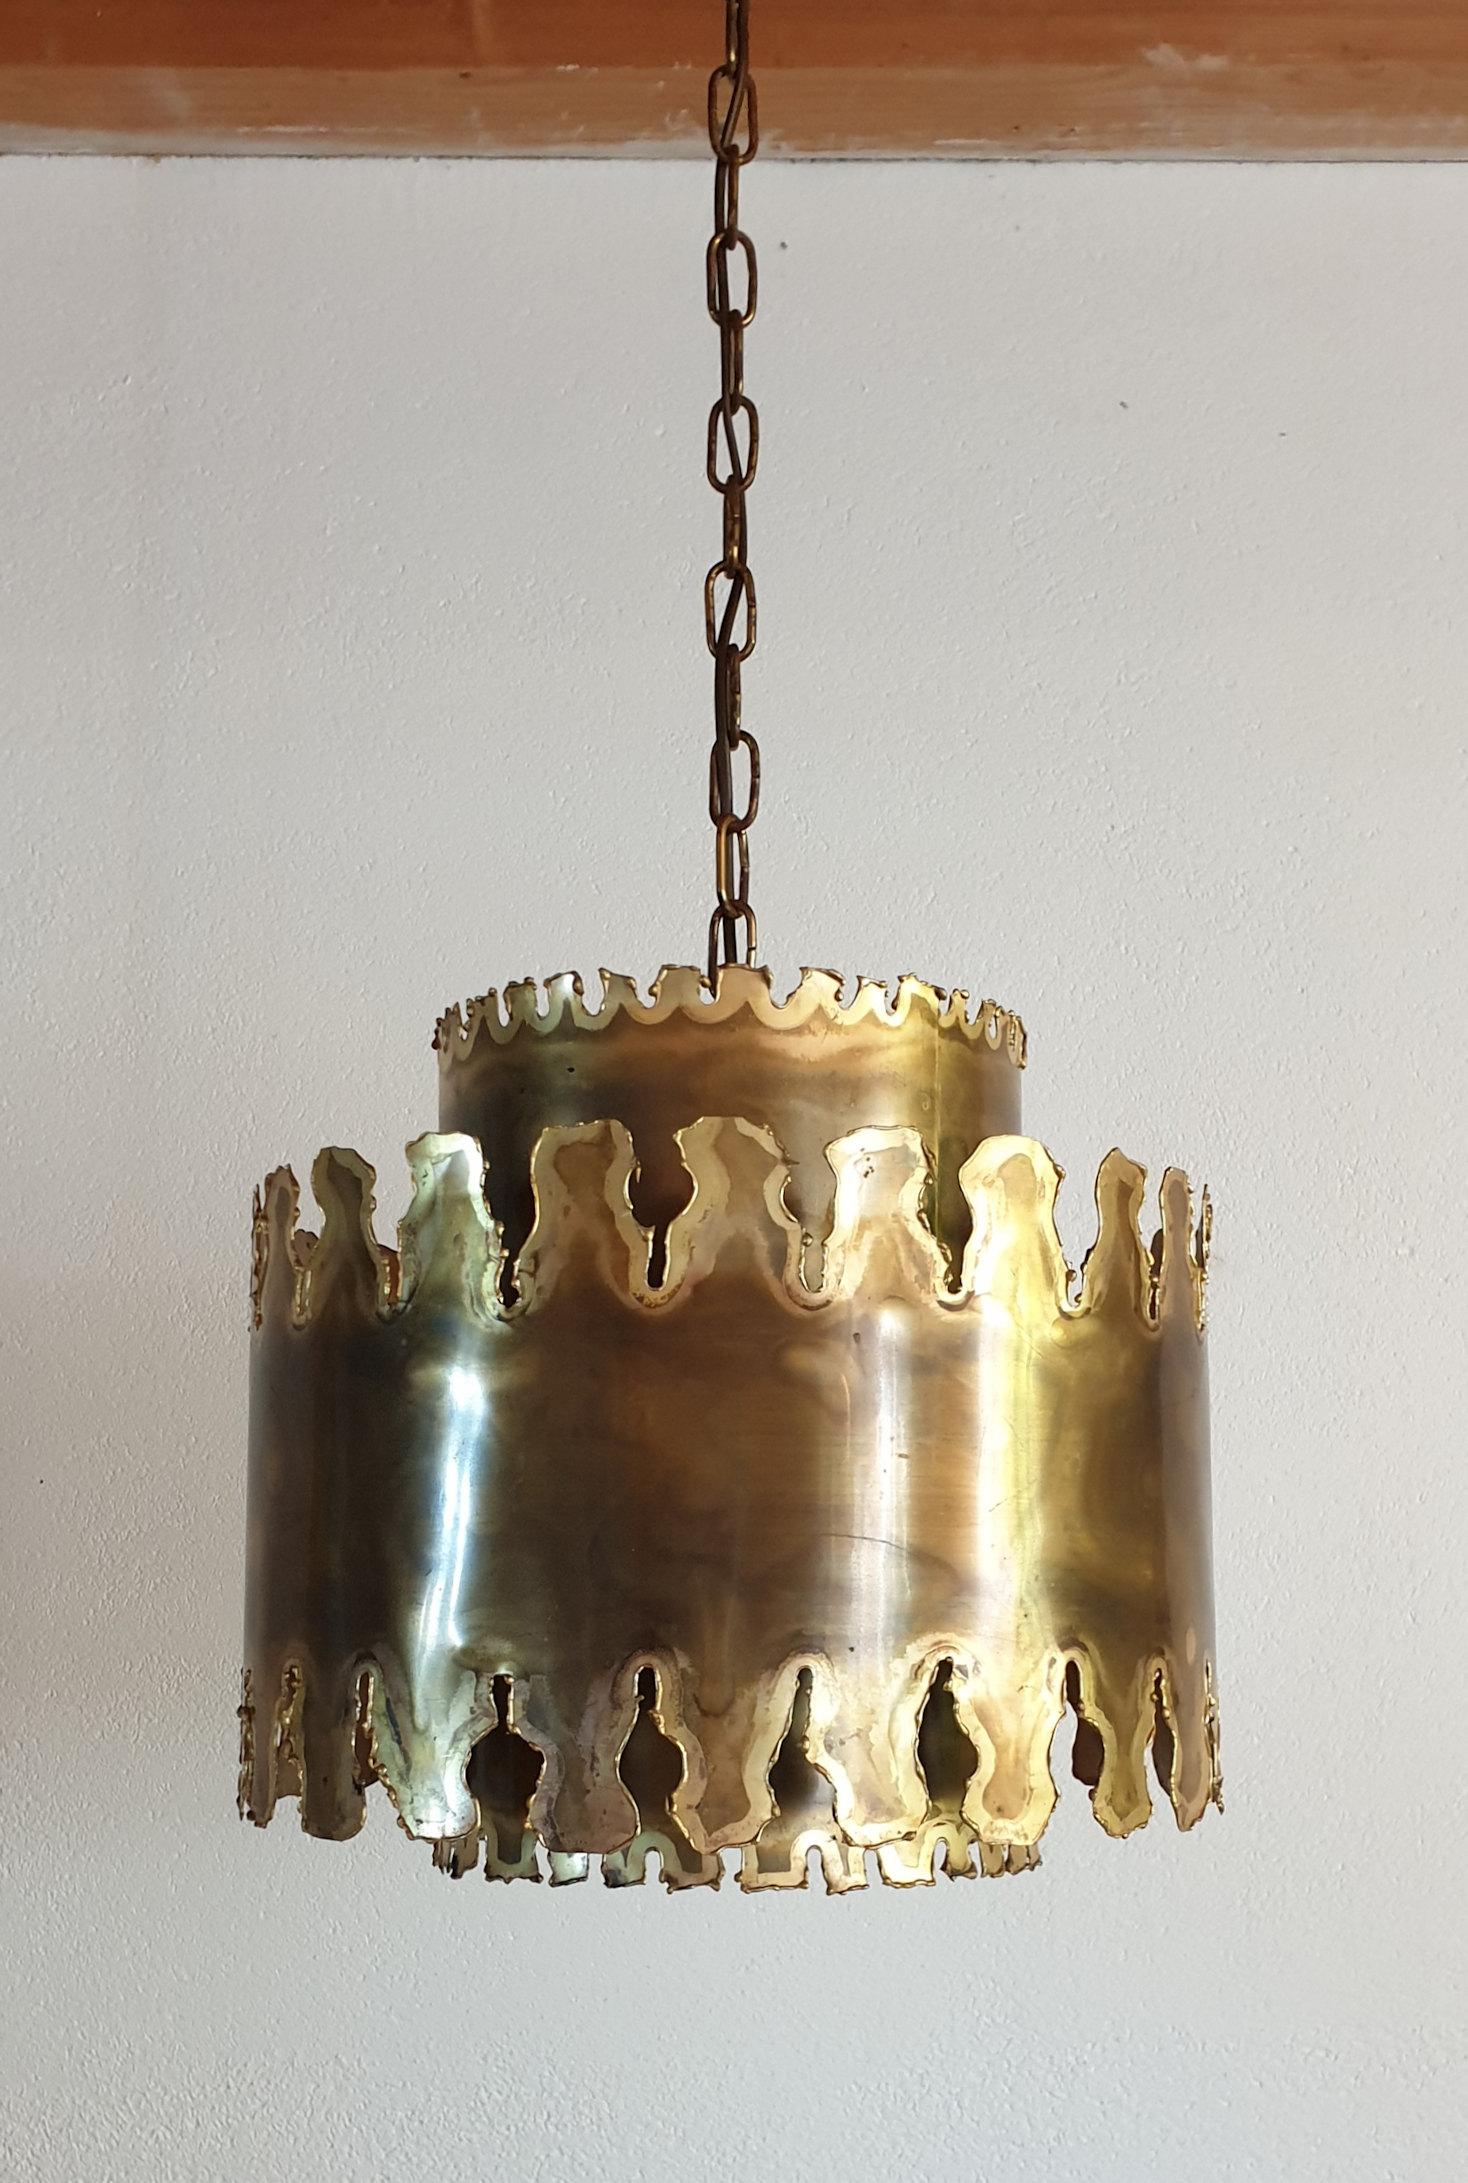 Brutalist style Vintage chandelier, made in oxidized brass, stamped: Holm Sorensen in the canopy, Denmark, 1960s
Danish designer Svend Aage Holm Sørensen (1913-2004) is known for his self-produced Mid Century lighting designs. He established his